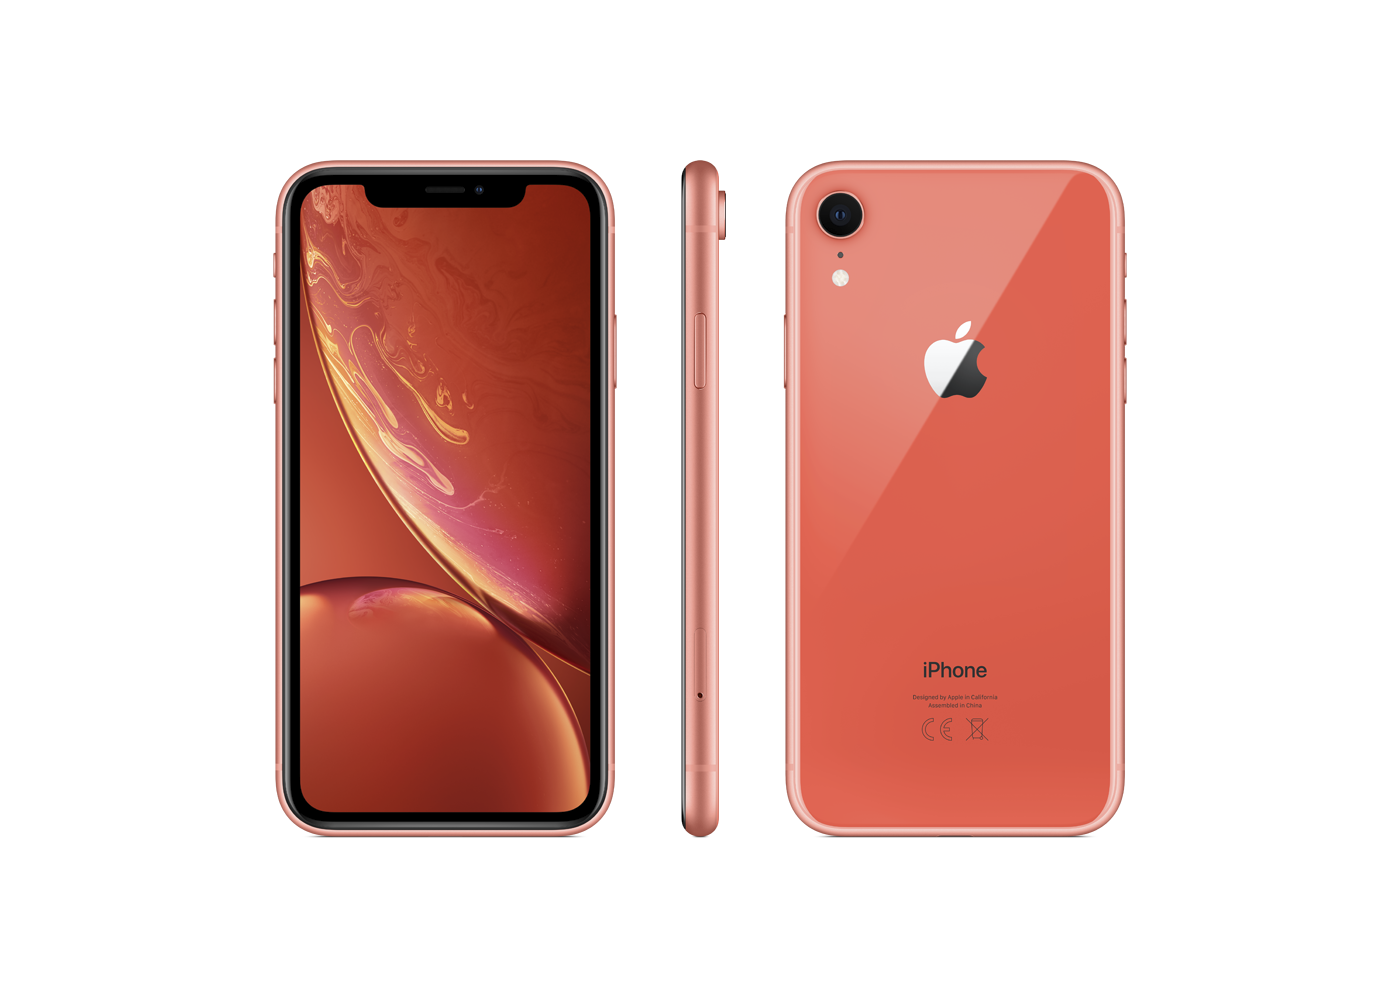 iPhone XR Coral 64 GB